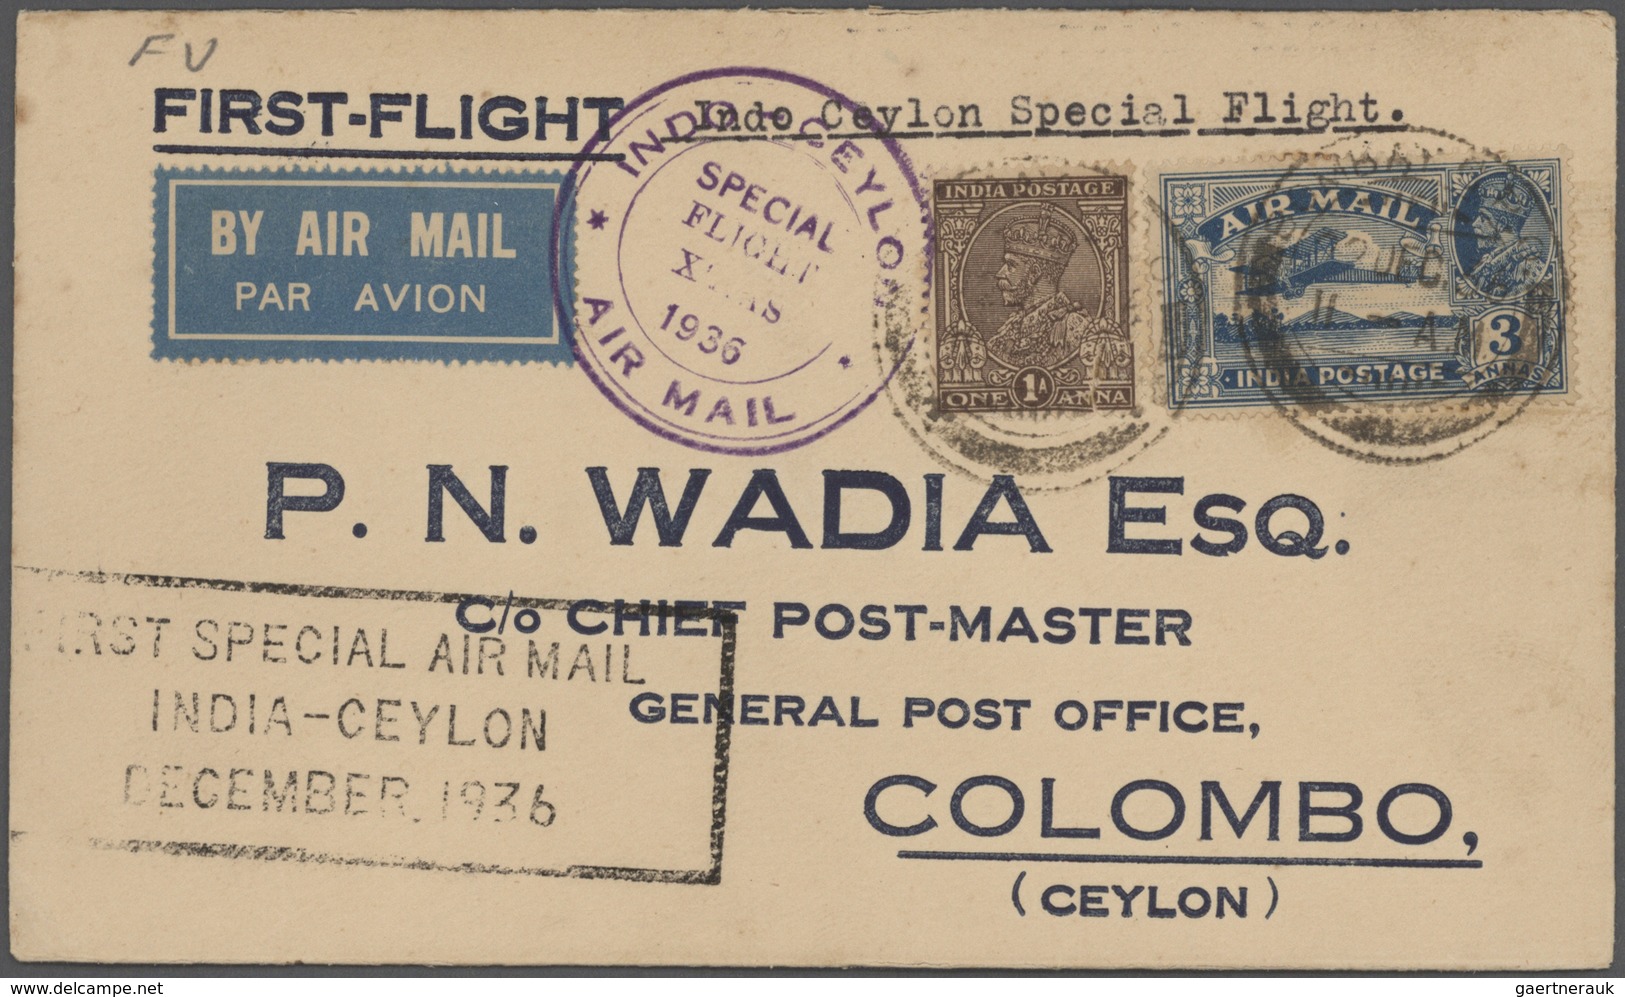 Indien - Flugpost: 1920's-1970's: About 60 Airmail Covers And Postcards, Most Of Them Carried By Fir - Luftpost